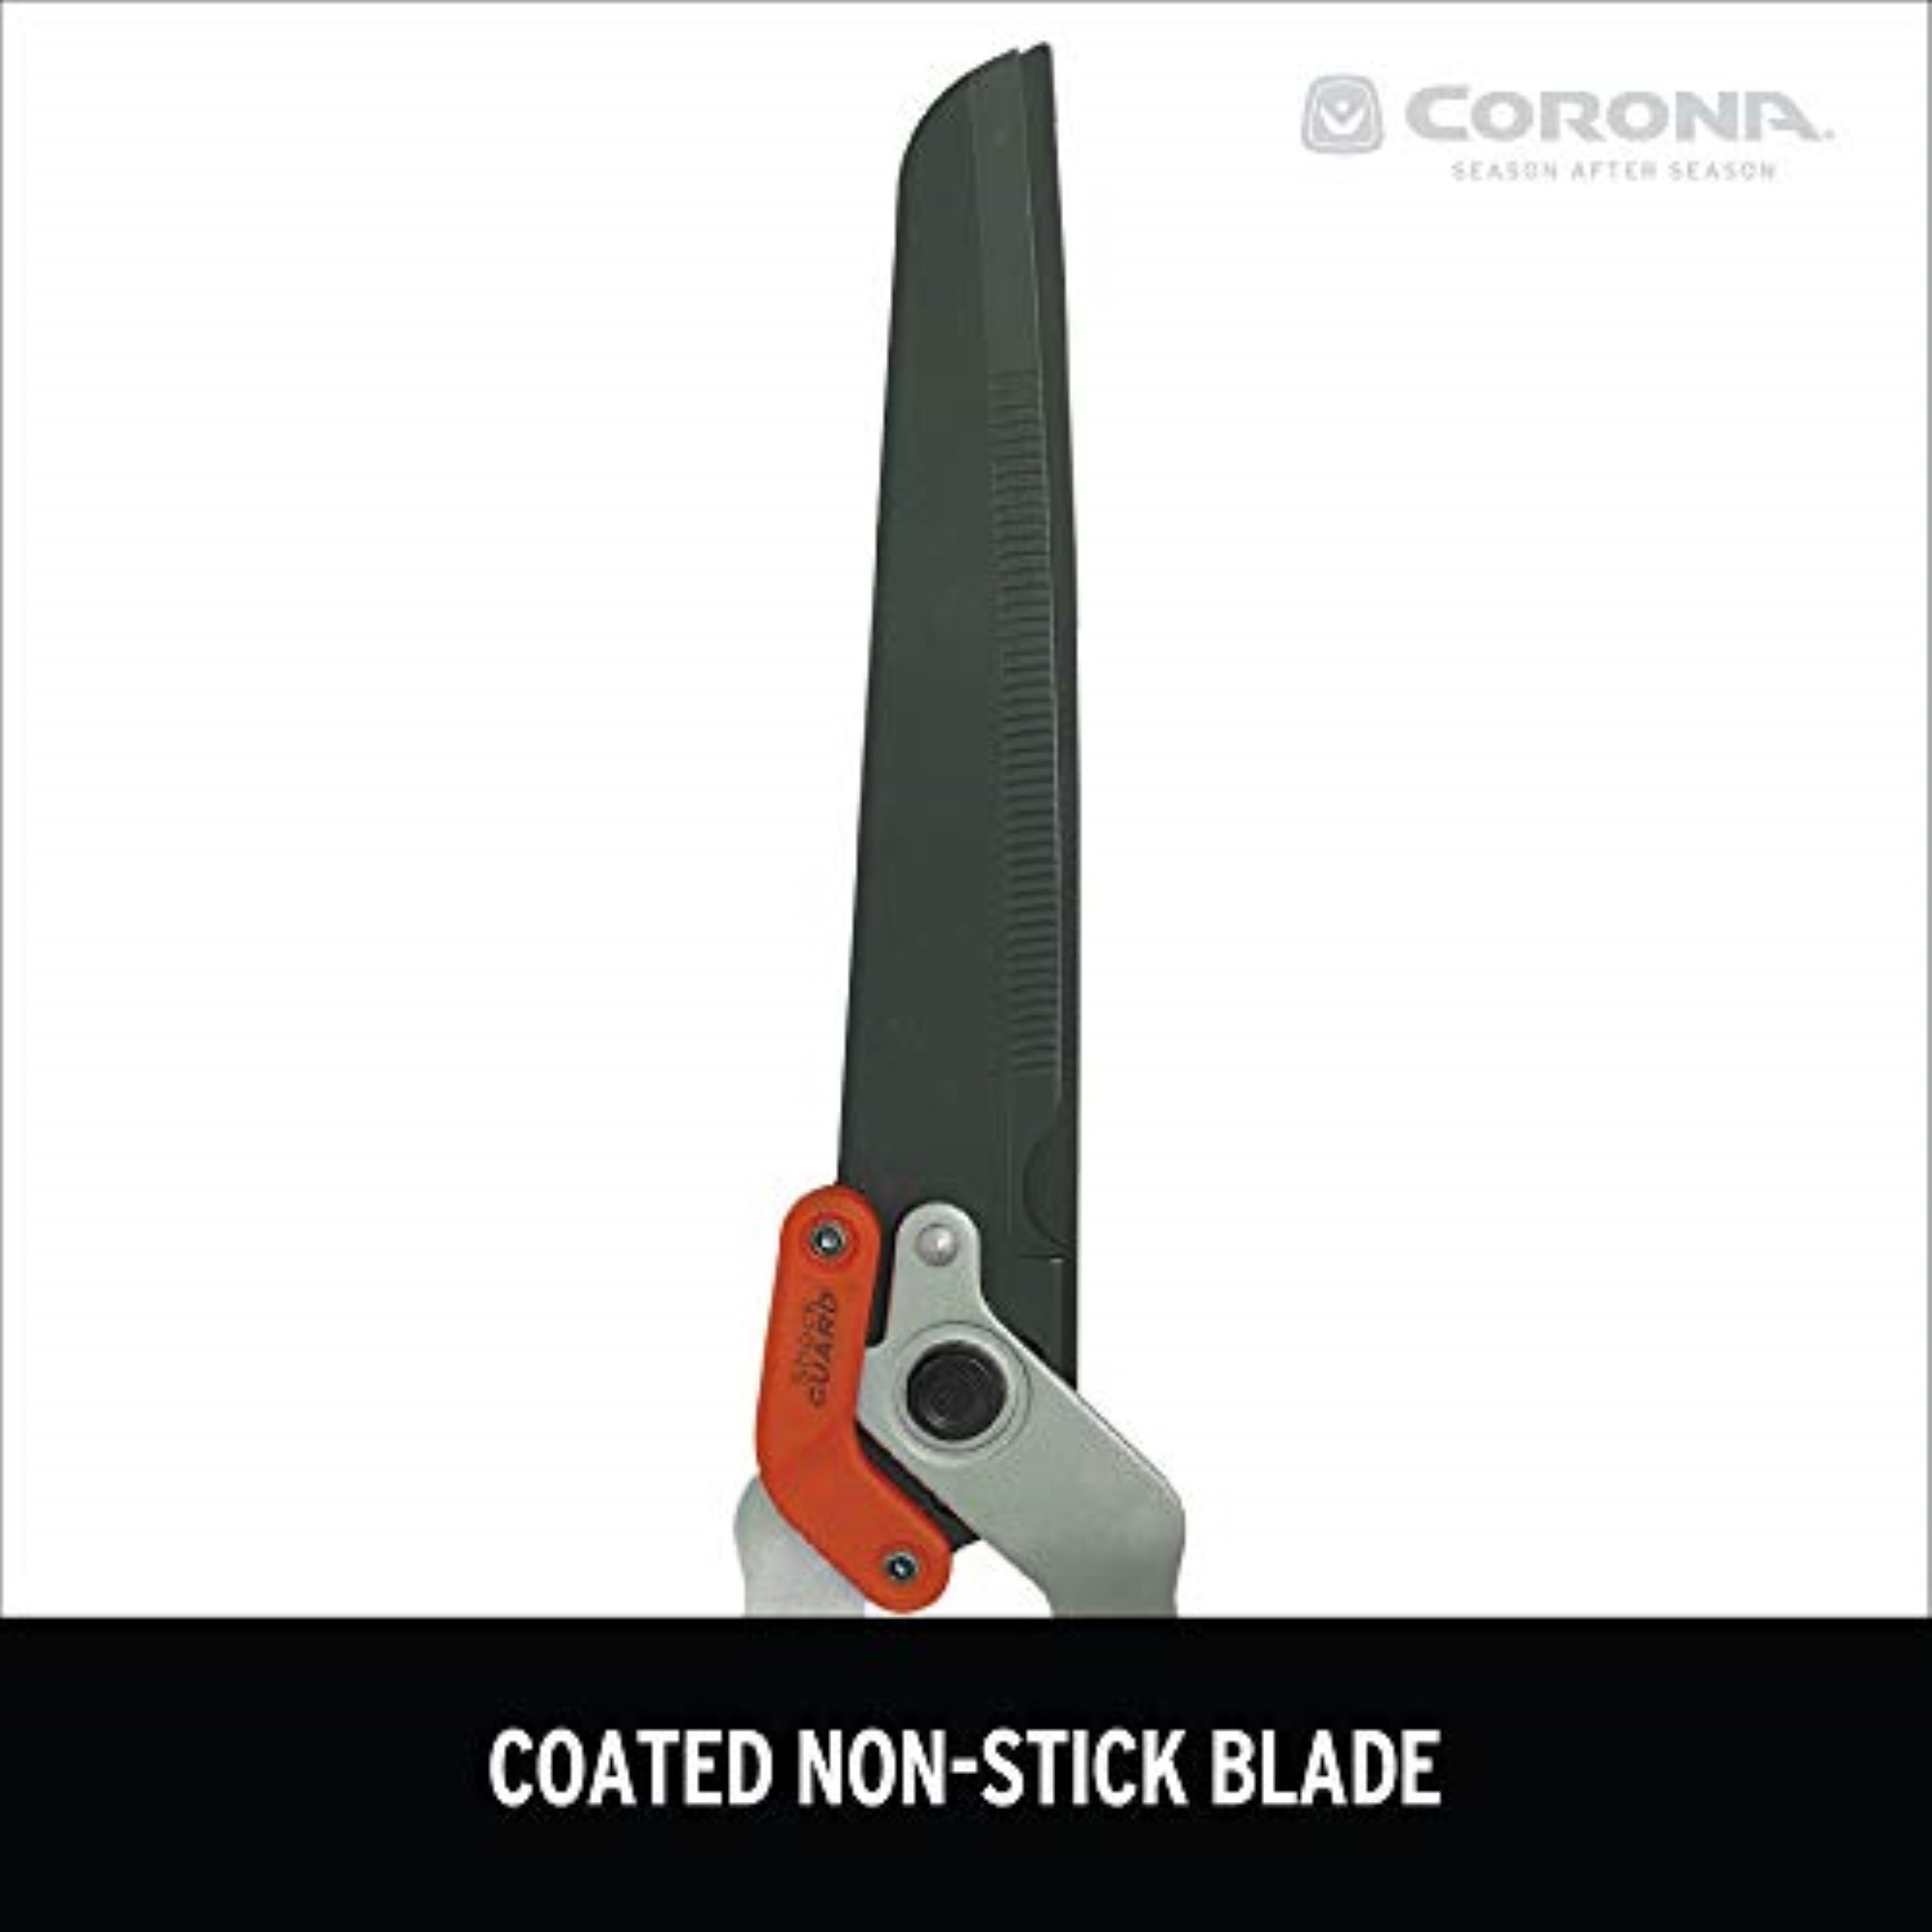 Corona Clipper Steel Blade, Trapezidal Handle Hedge Shear with Soft Grip, 10" Blade